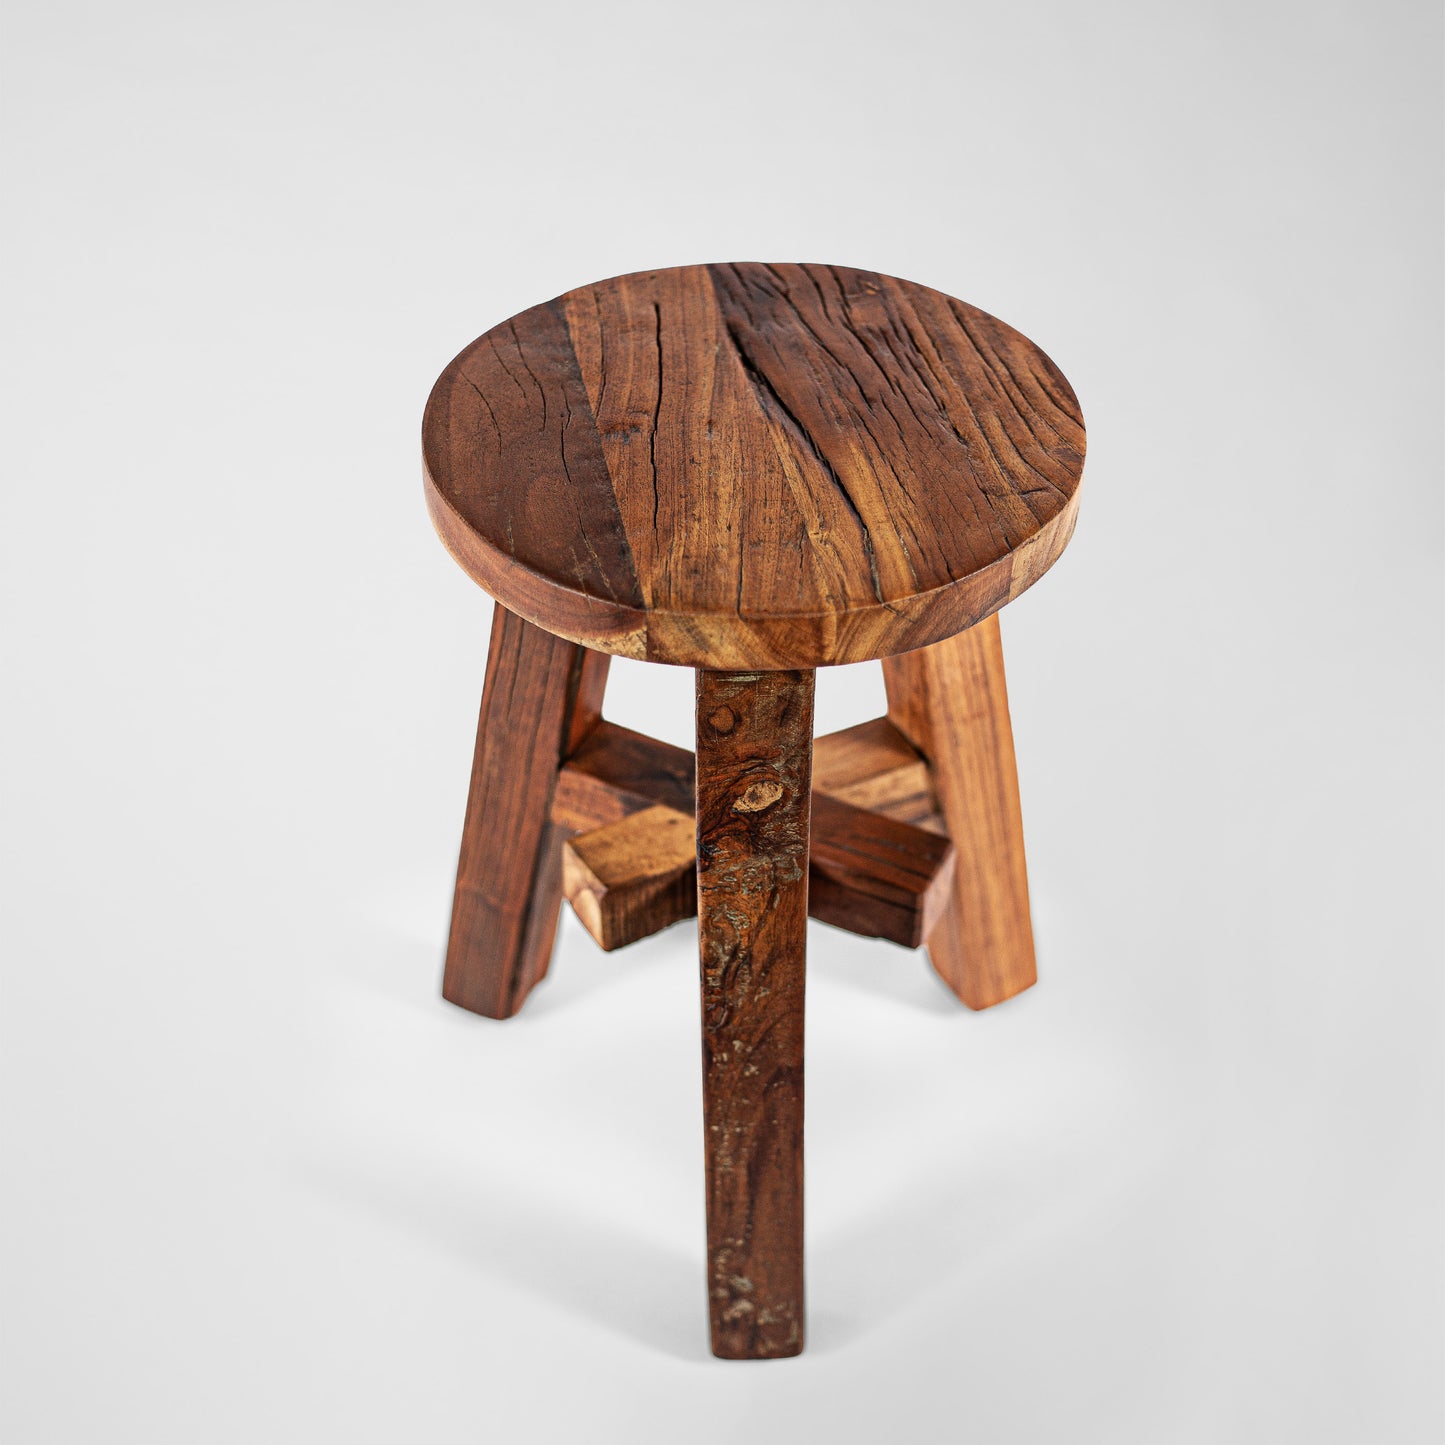 Willy Wonder – country house design stool made of wood